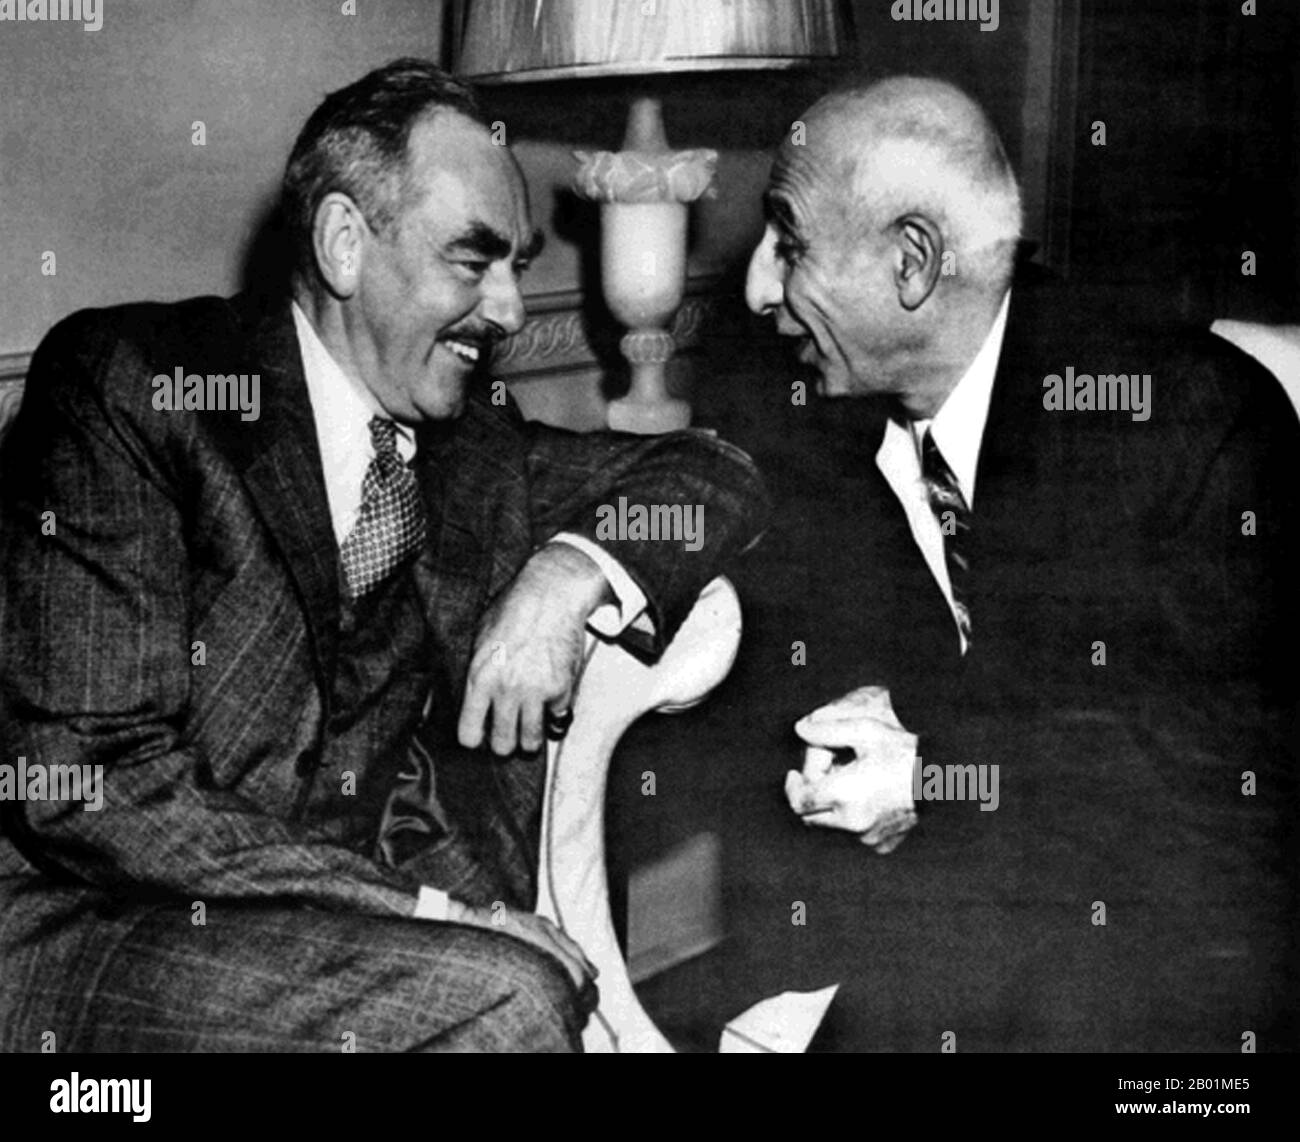 Iran/Persia: Mohammad Mosaddegh (16 June 1882 - 5 March 1967), Prime Minister of Iran from 1951-1953, with US Secretary of State Dean Acheson, Washington DC, 24 October 1951.  The Mossadeq administration introduced a wide range of social reforms but was most notable for its nationalisation of the Iranian oil industry, which had been under British control since 1913 through the Anglo-Persian Oil Company.  Mosaddegh was removed from power in a coup on 19 August 1953, organised and carried out by the United States CIA at the request of British MI6. Stock Photo